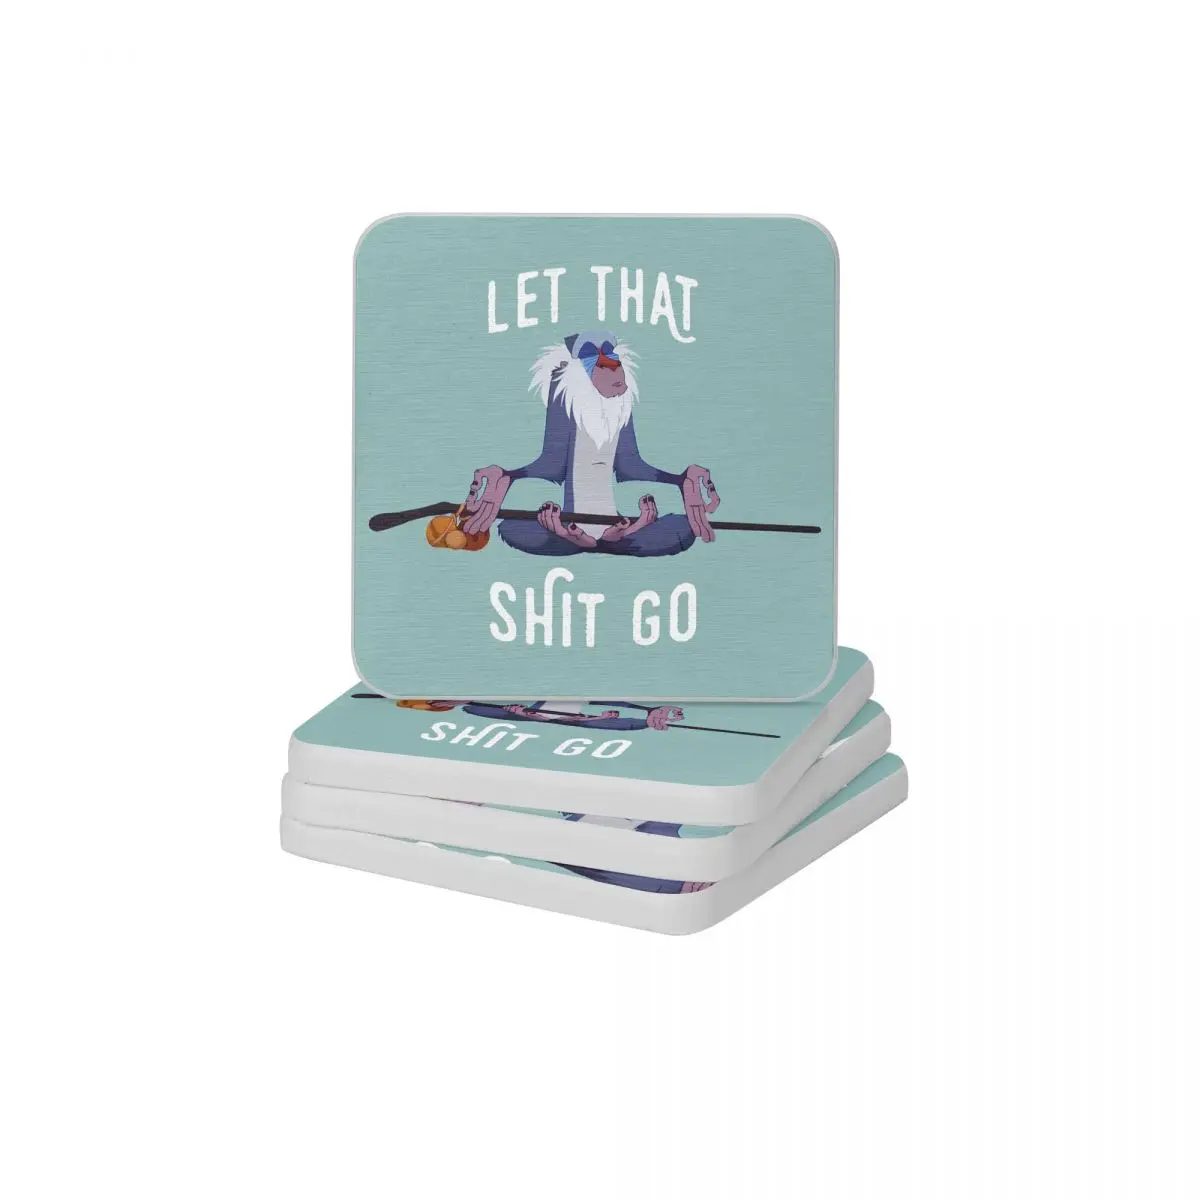 

Let That Shit Go Diatom Square Round Coaster Water Absorption Cup Bonsai Mat Soap Toothbrush Pad Wholesale 10x10cm